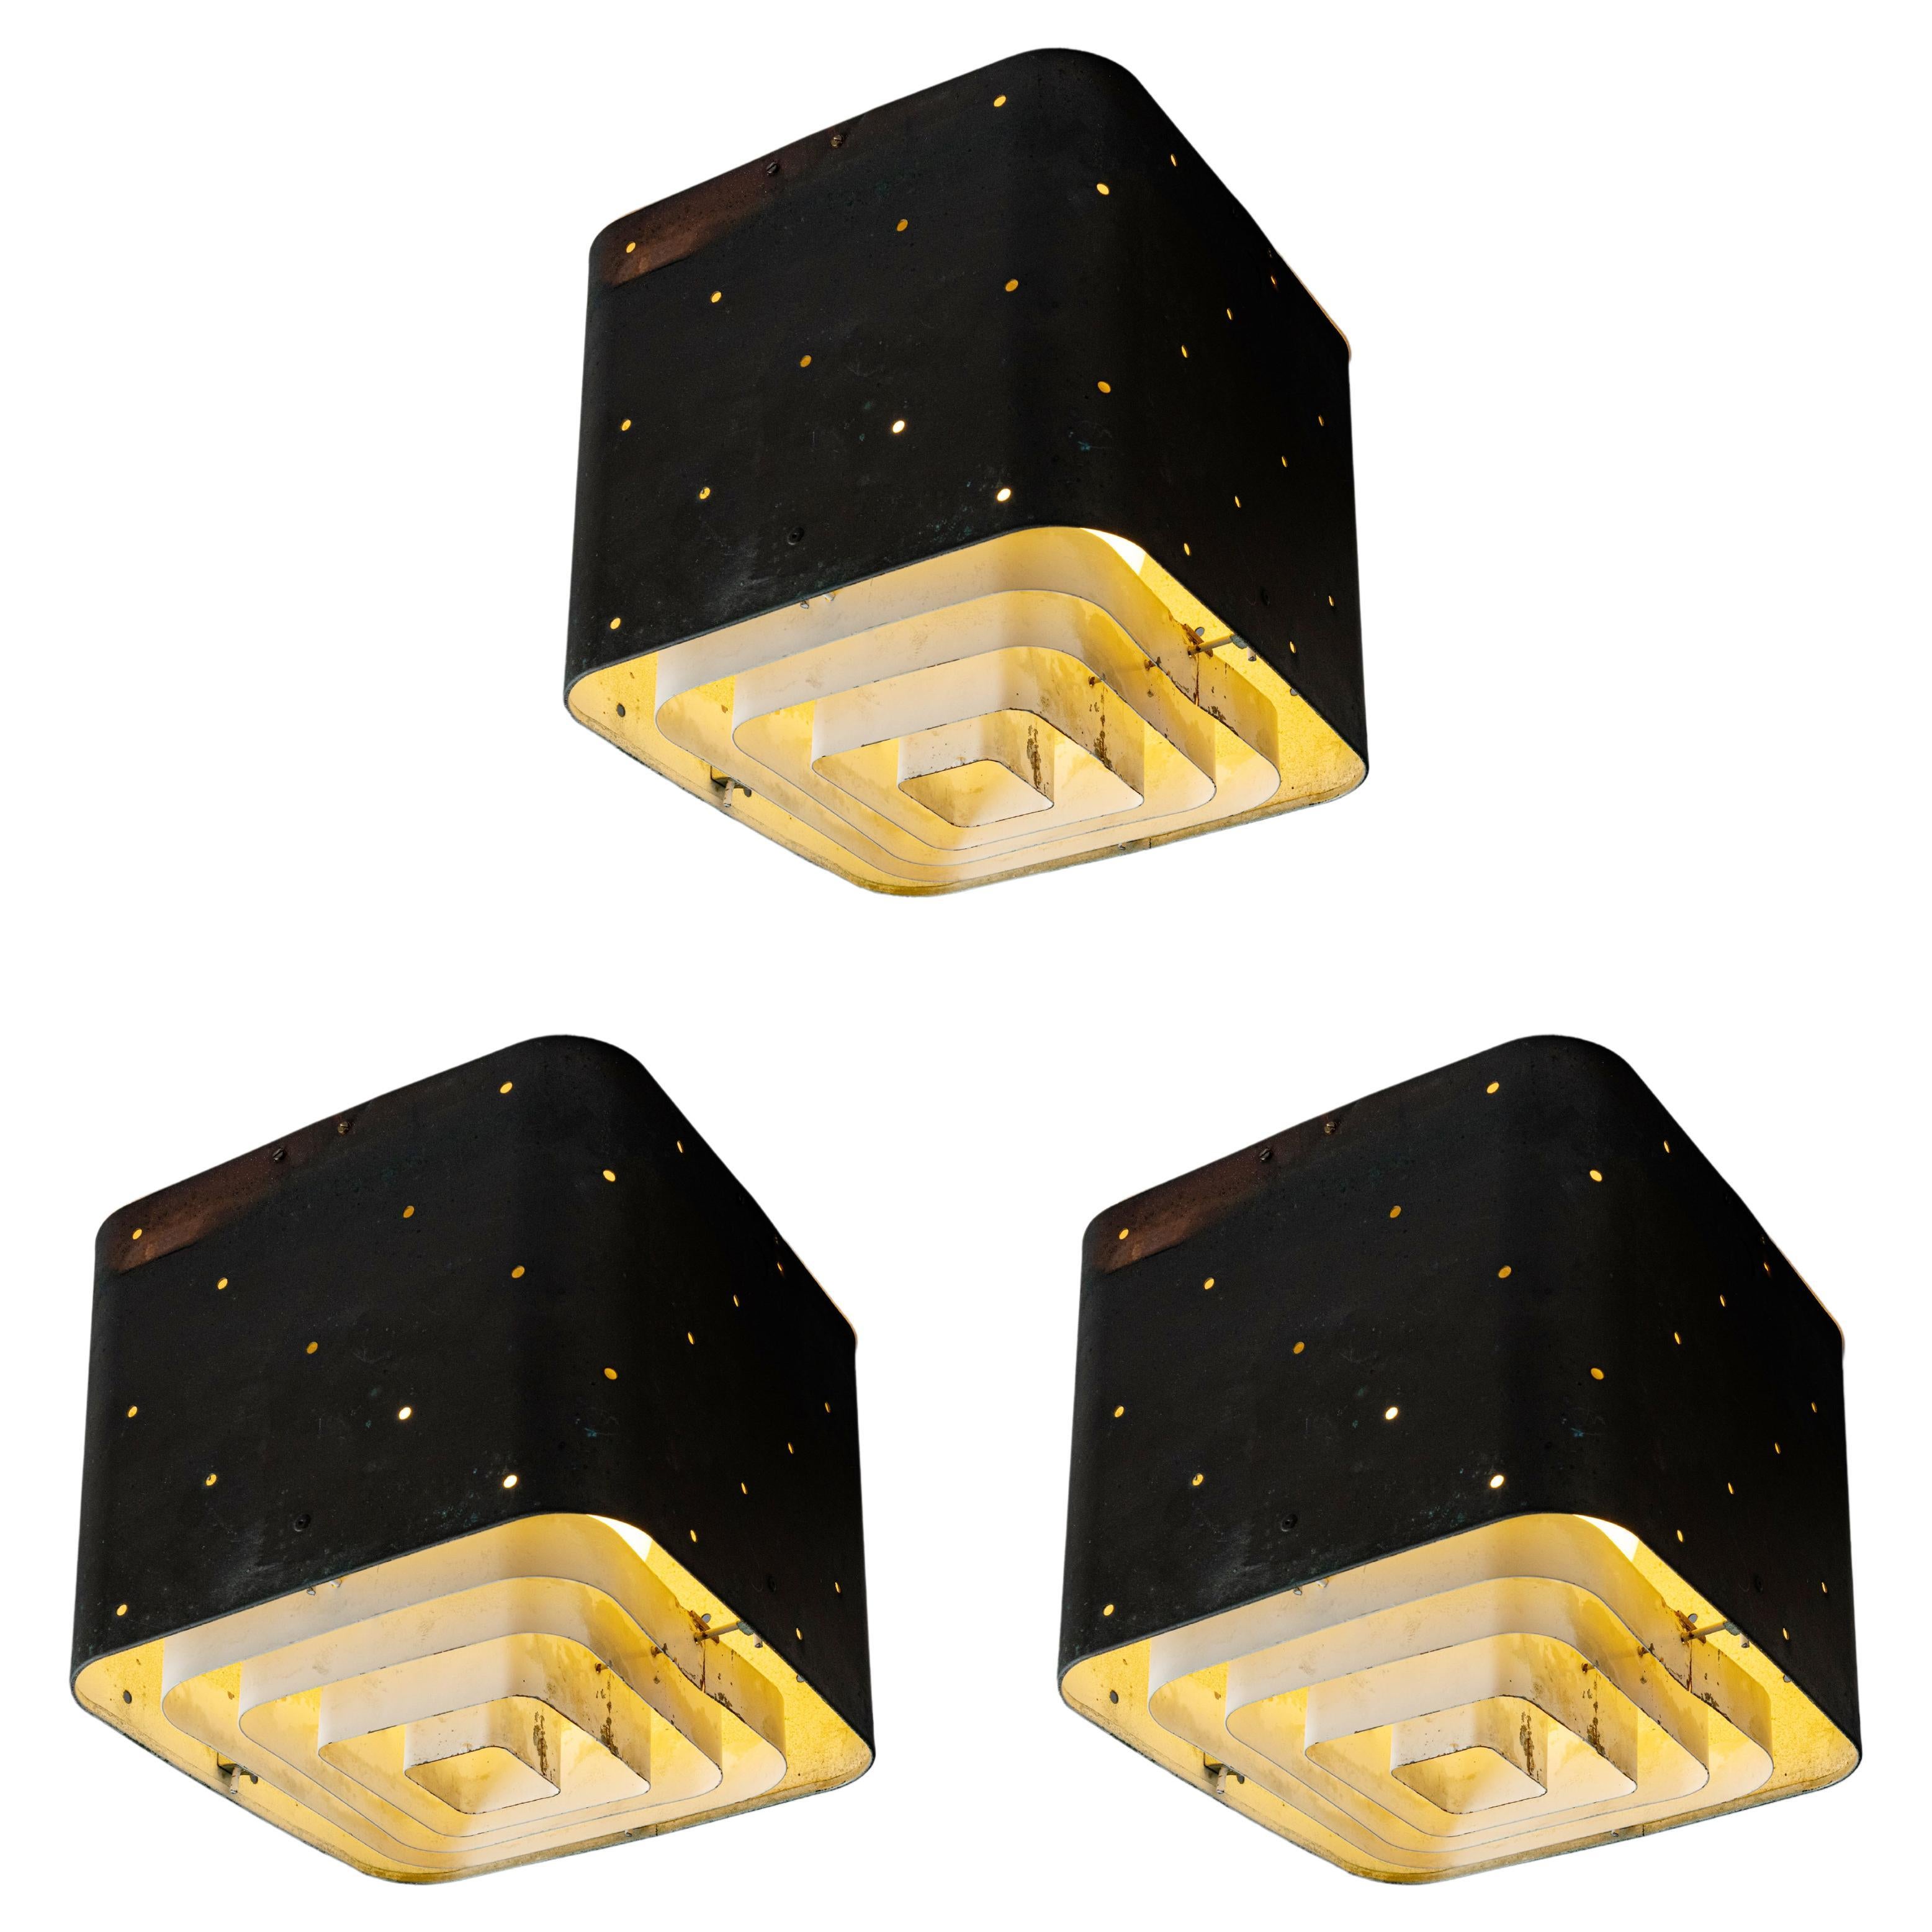 Two "Starry Sky" Exterior Ceiling Lights by Paavo Tynell